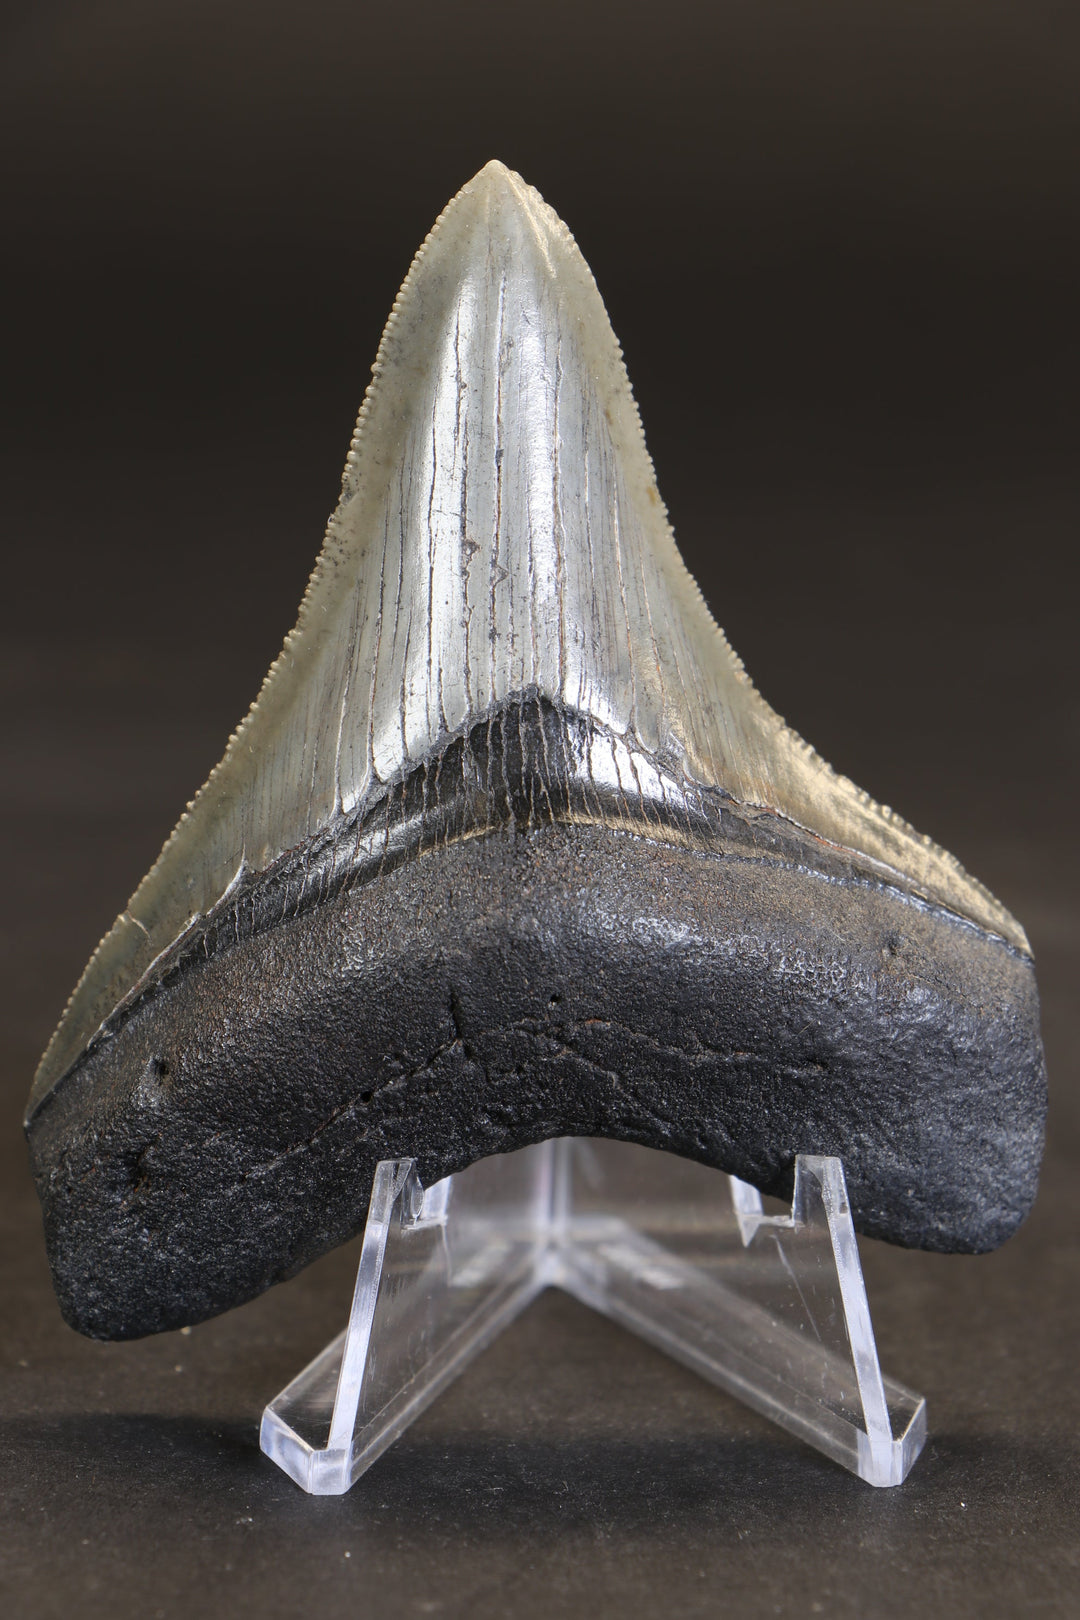 3" Megalodon Tooth TD464